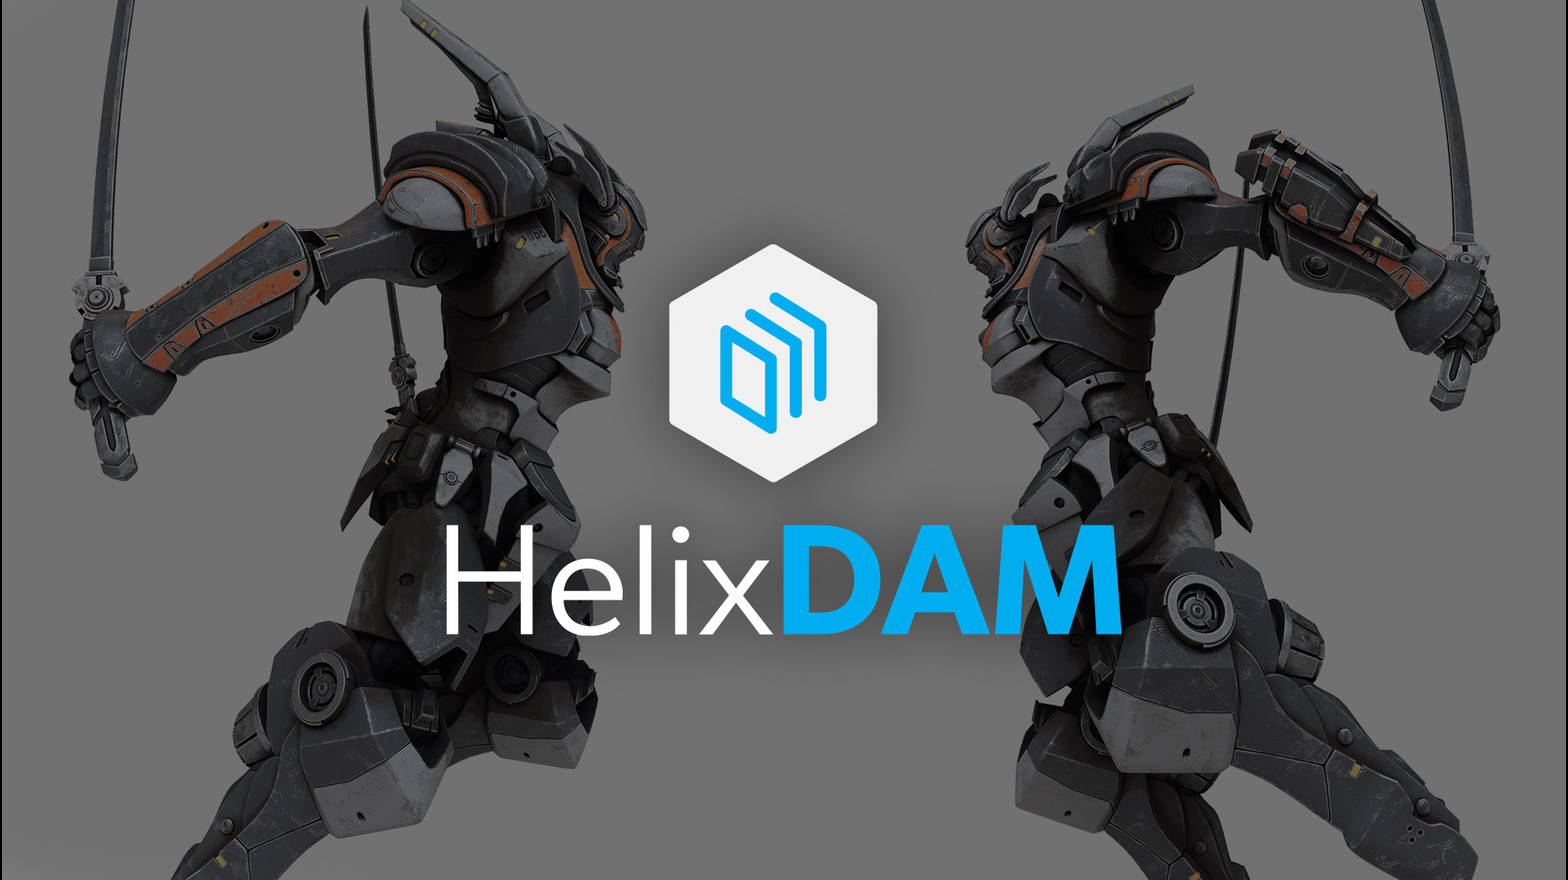 two robots facing each other with the word HelixDAM superimposed over them